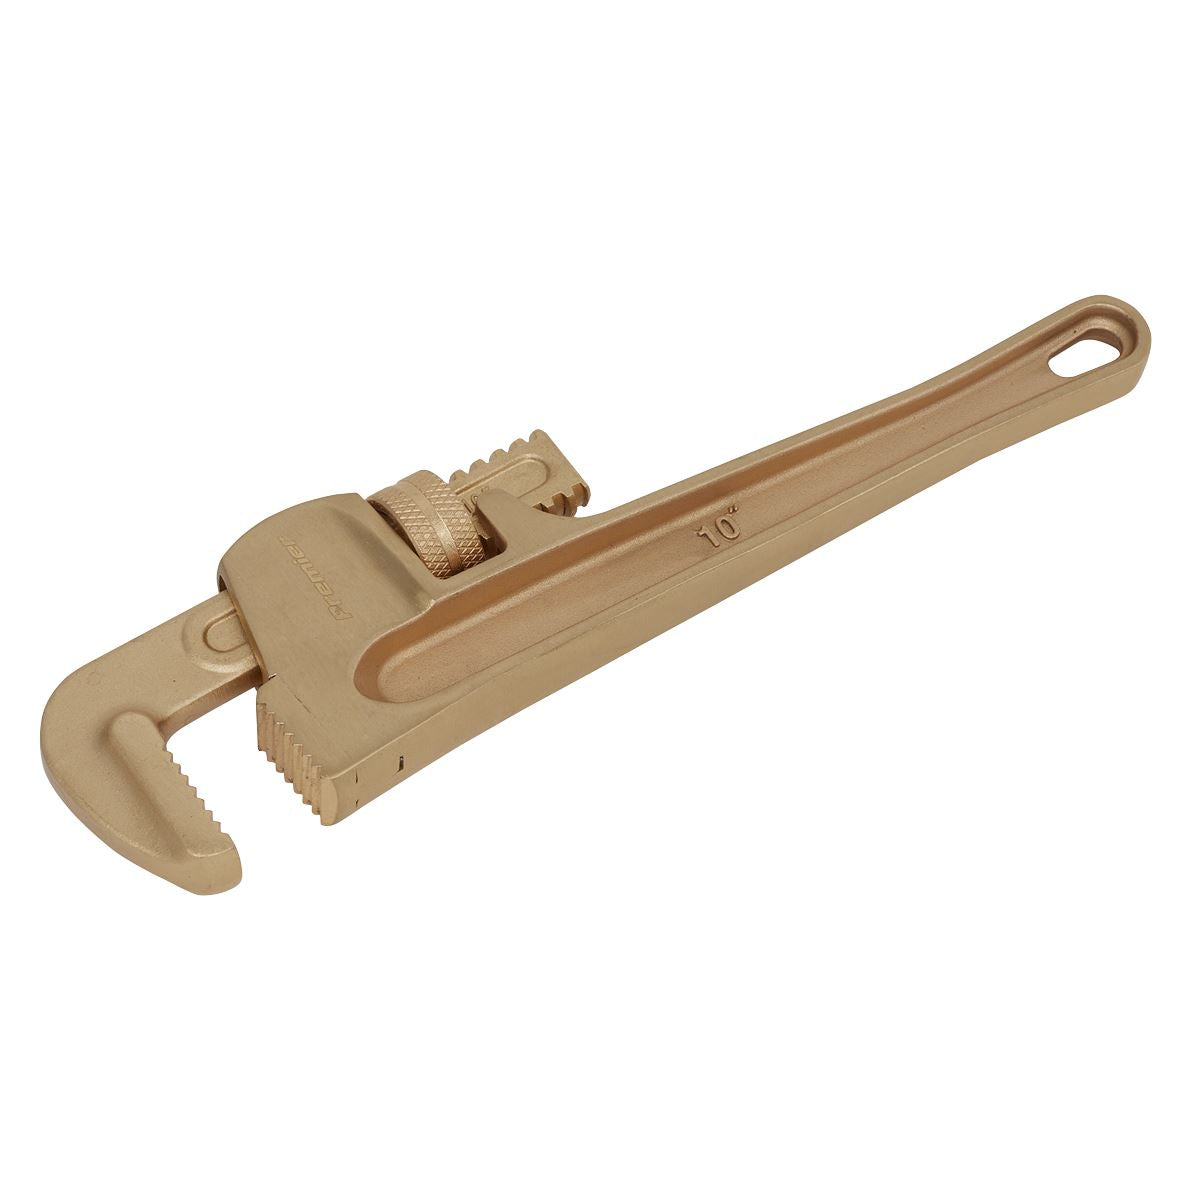 Sealey Premier Pipe Wrench 250mm - Non-Sparking